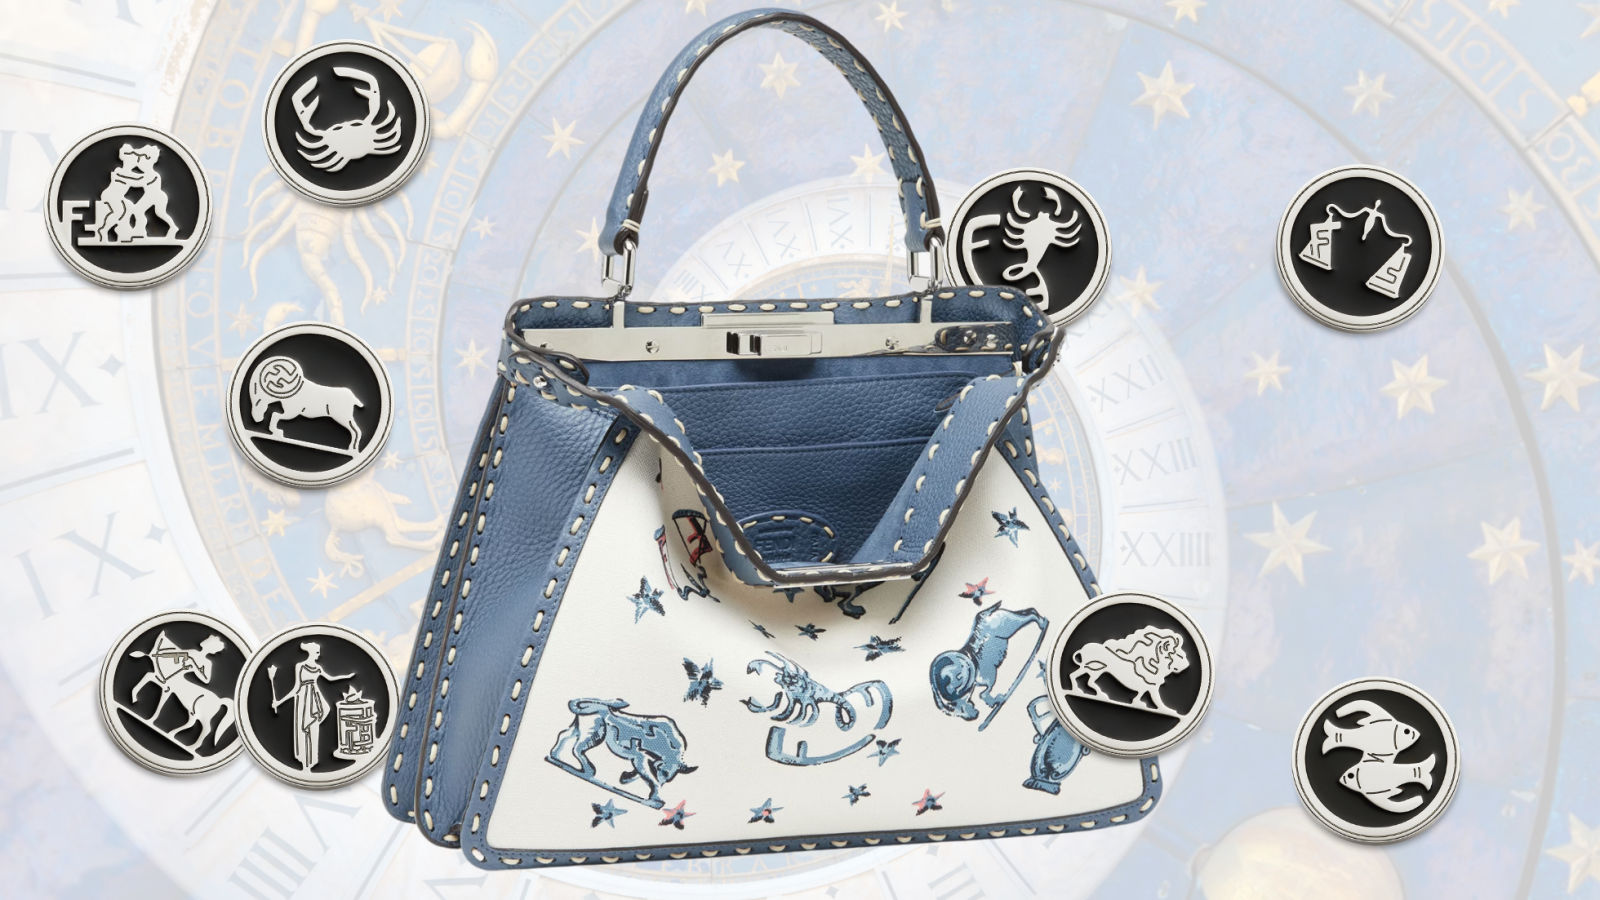 FENDI Taps into Astrology with Star-Crossed Summer Collection - S